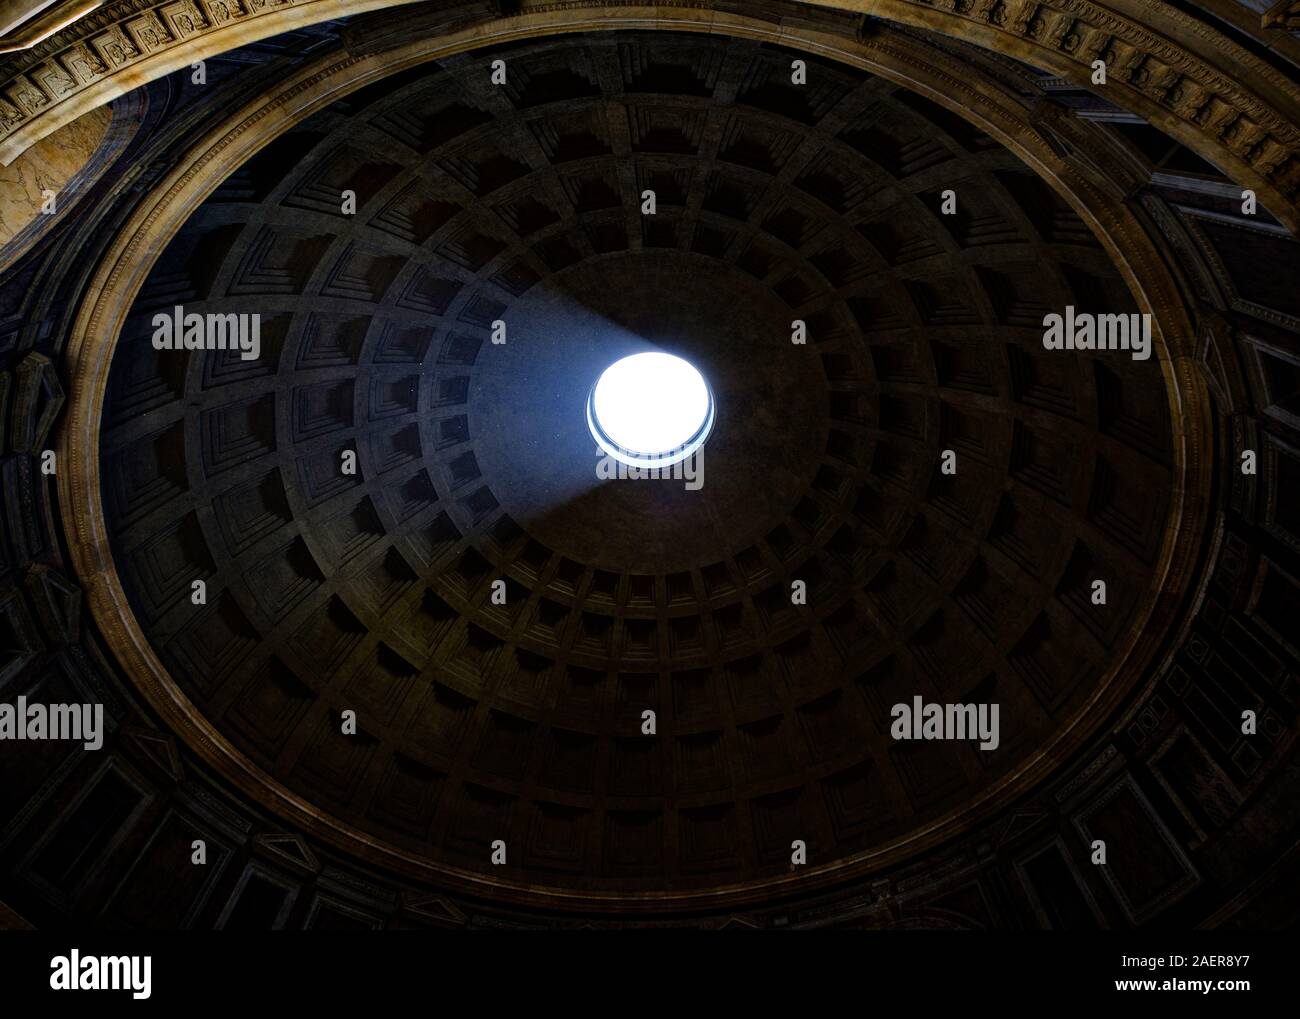 A shaft of sunlight illuminates the vaulted interior of the Pantheon dome. Rome, Italy. Stock Photo